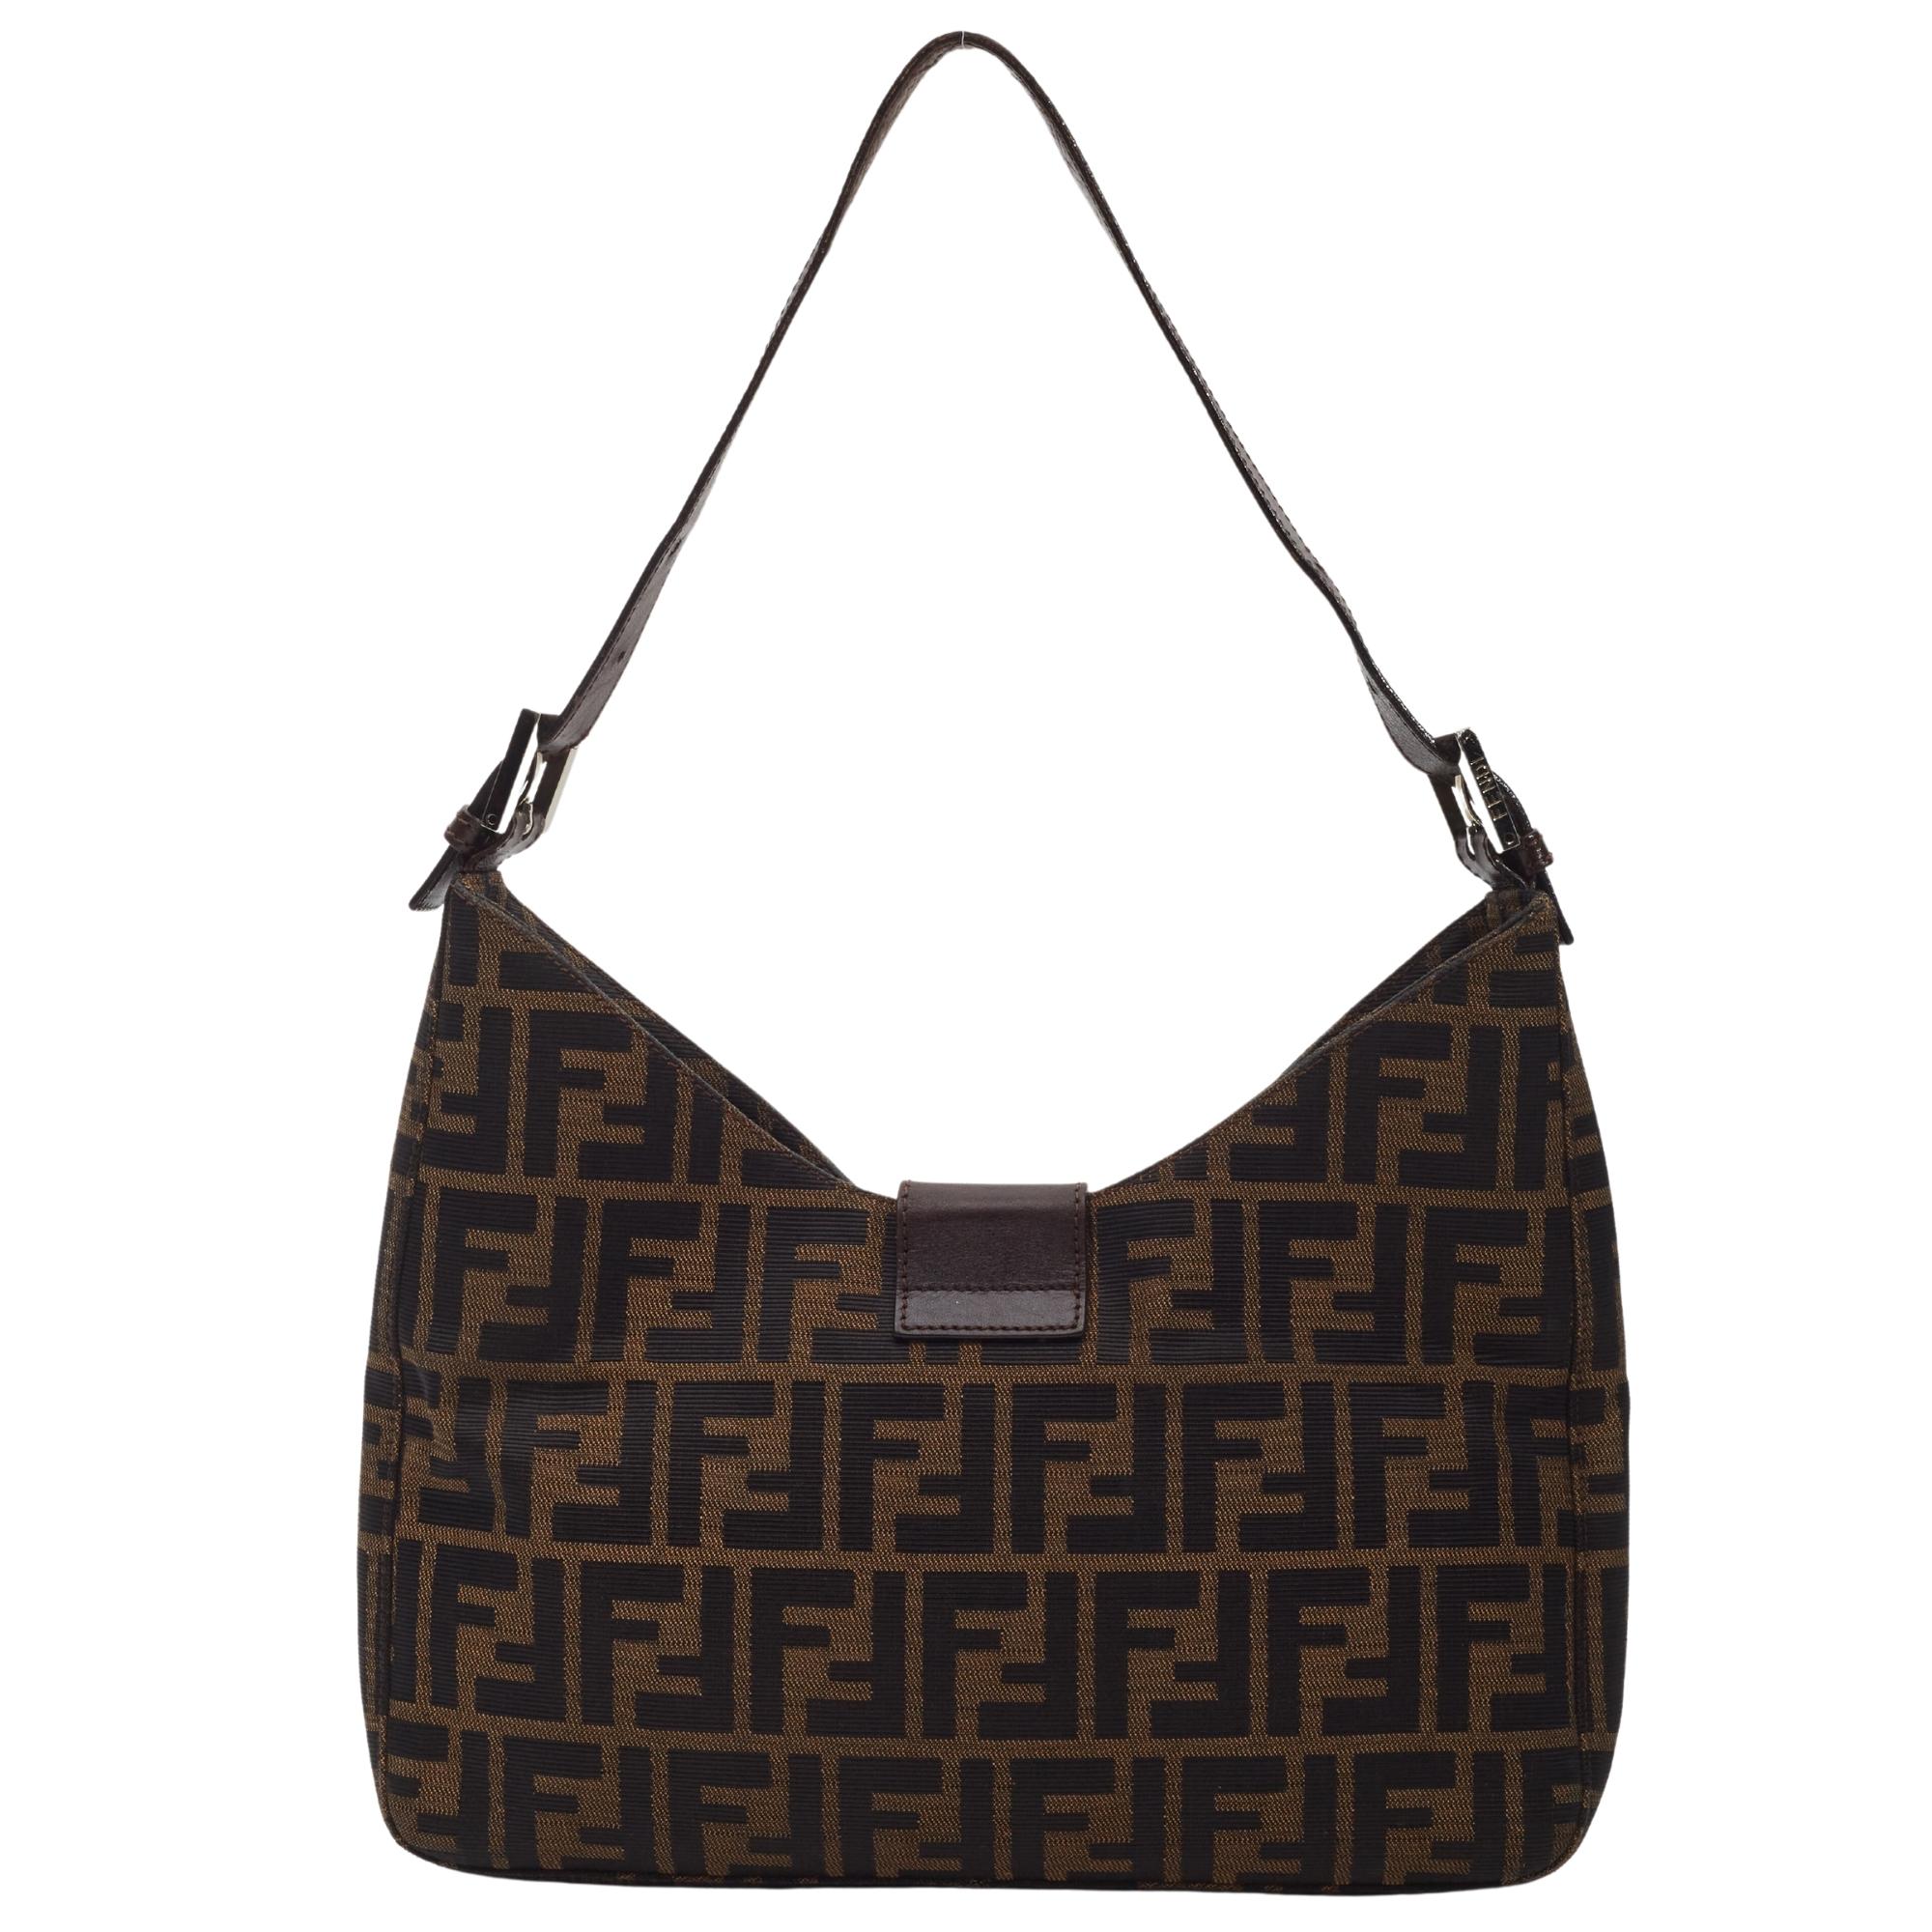 This shoulder bag is made of Fendi Zucca canvas in tobacco brown. The bag features an adjustable brown leather shoulder strap and a crossover strap with a polished silver Fendi FF logo. The flap opens to a brown fabric interior with a zipper